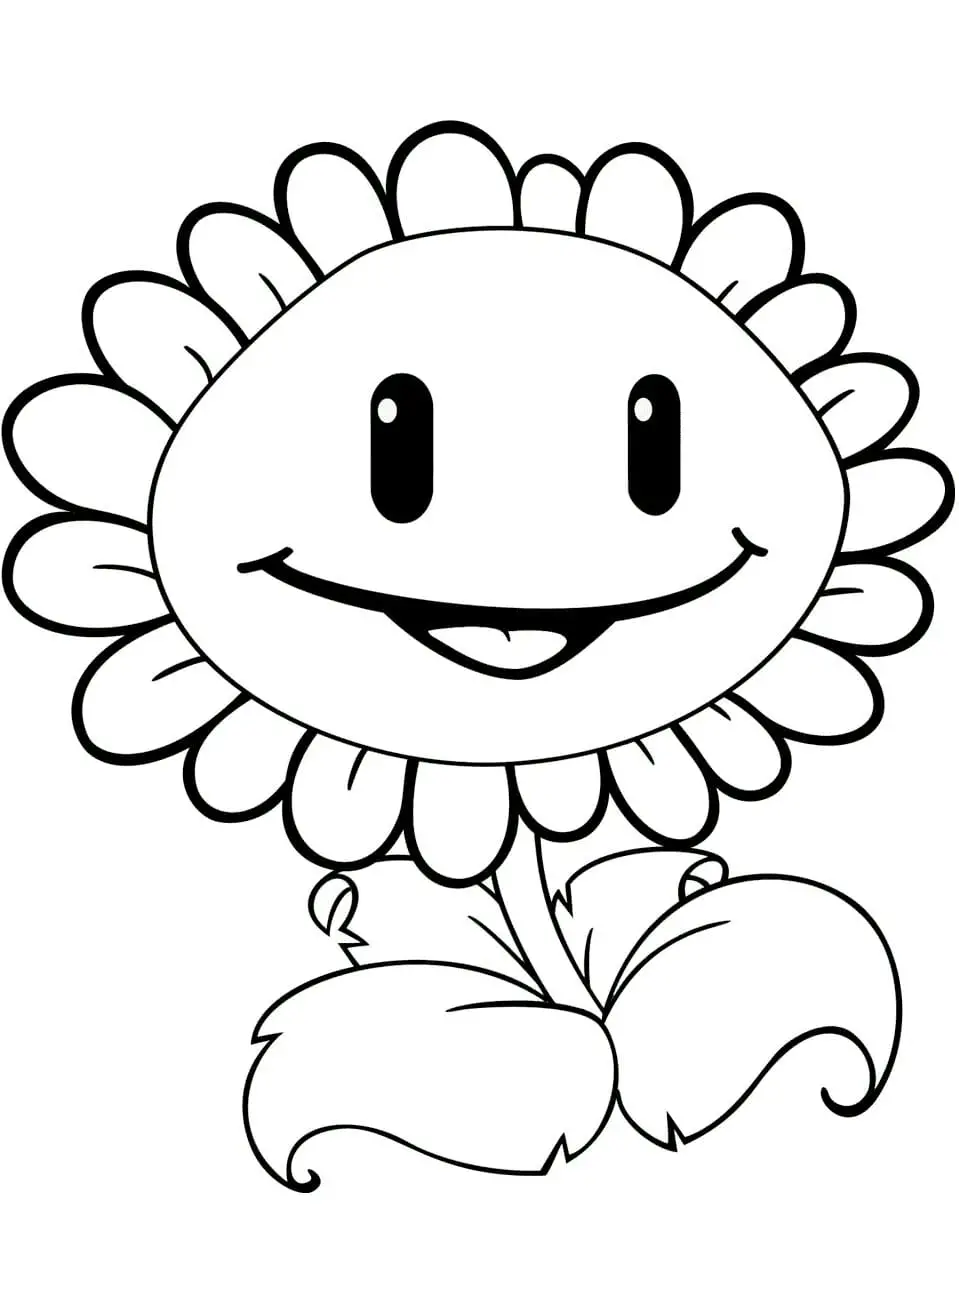 Plants vs zombies coloring book